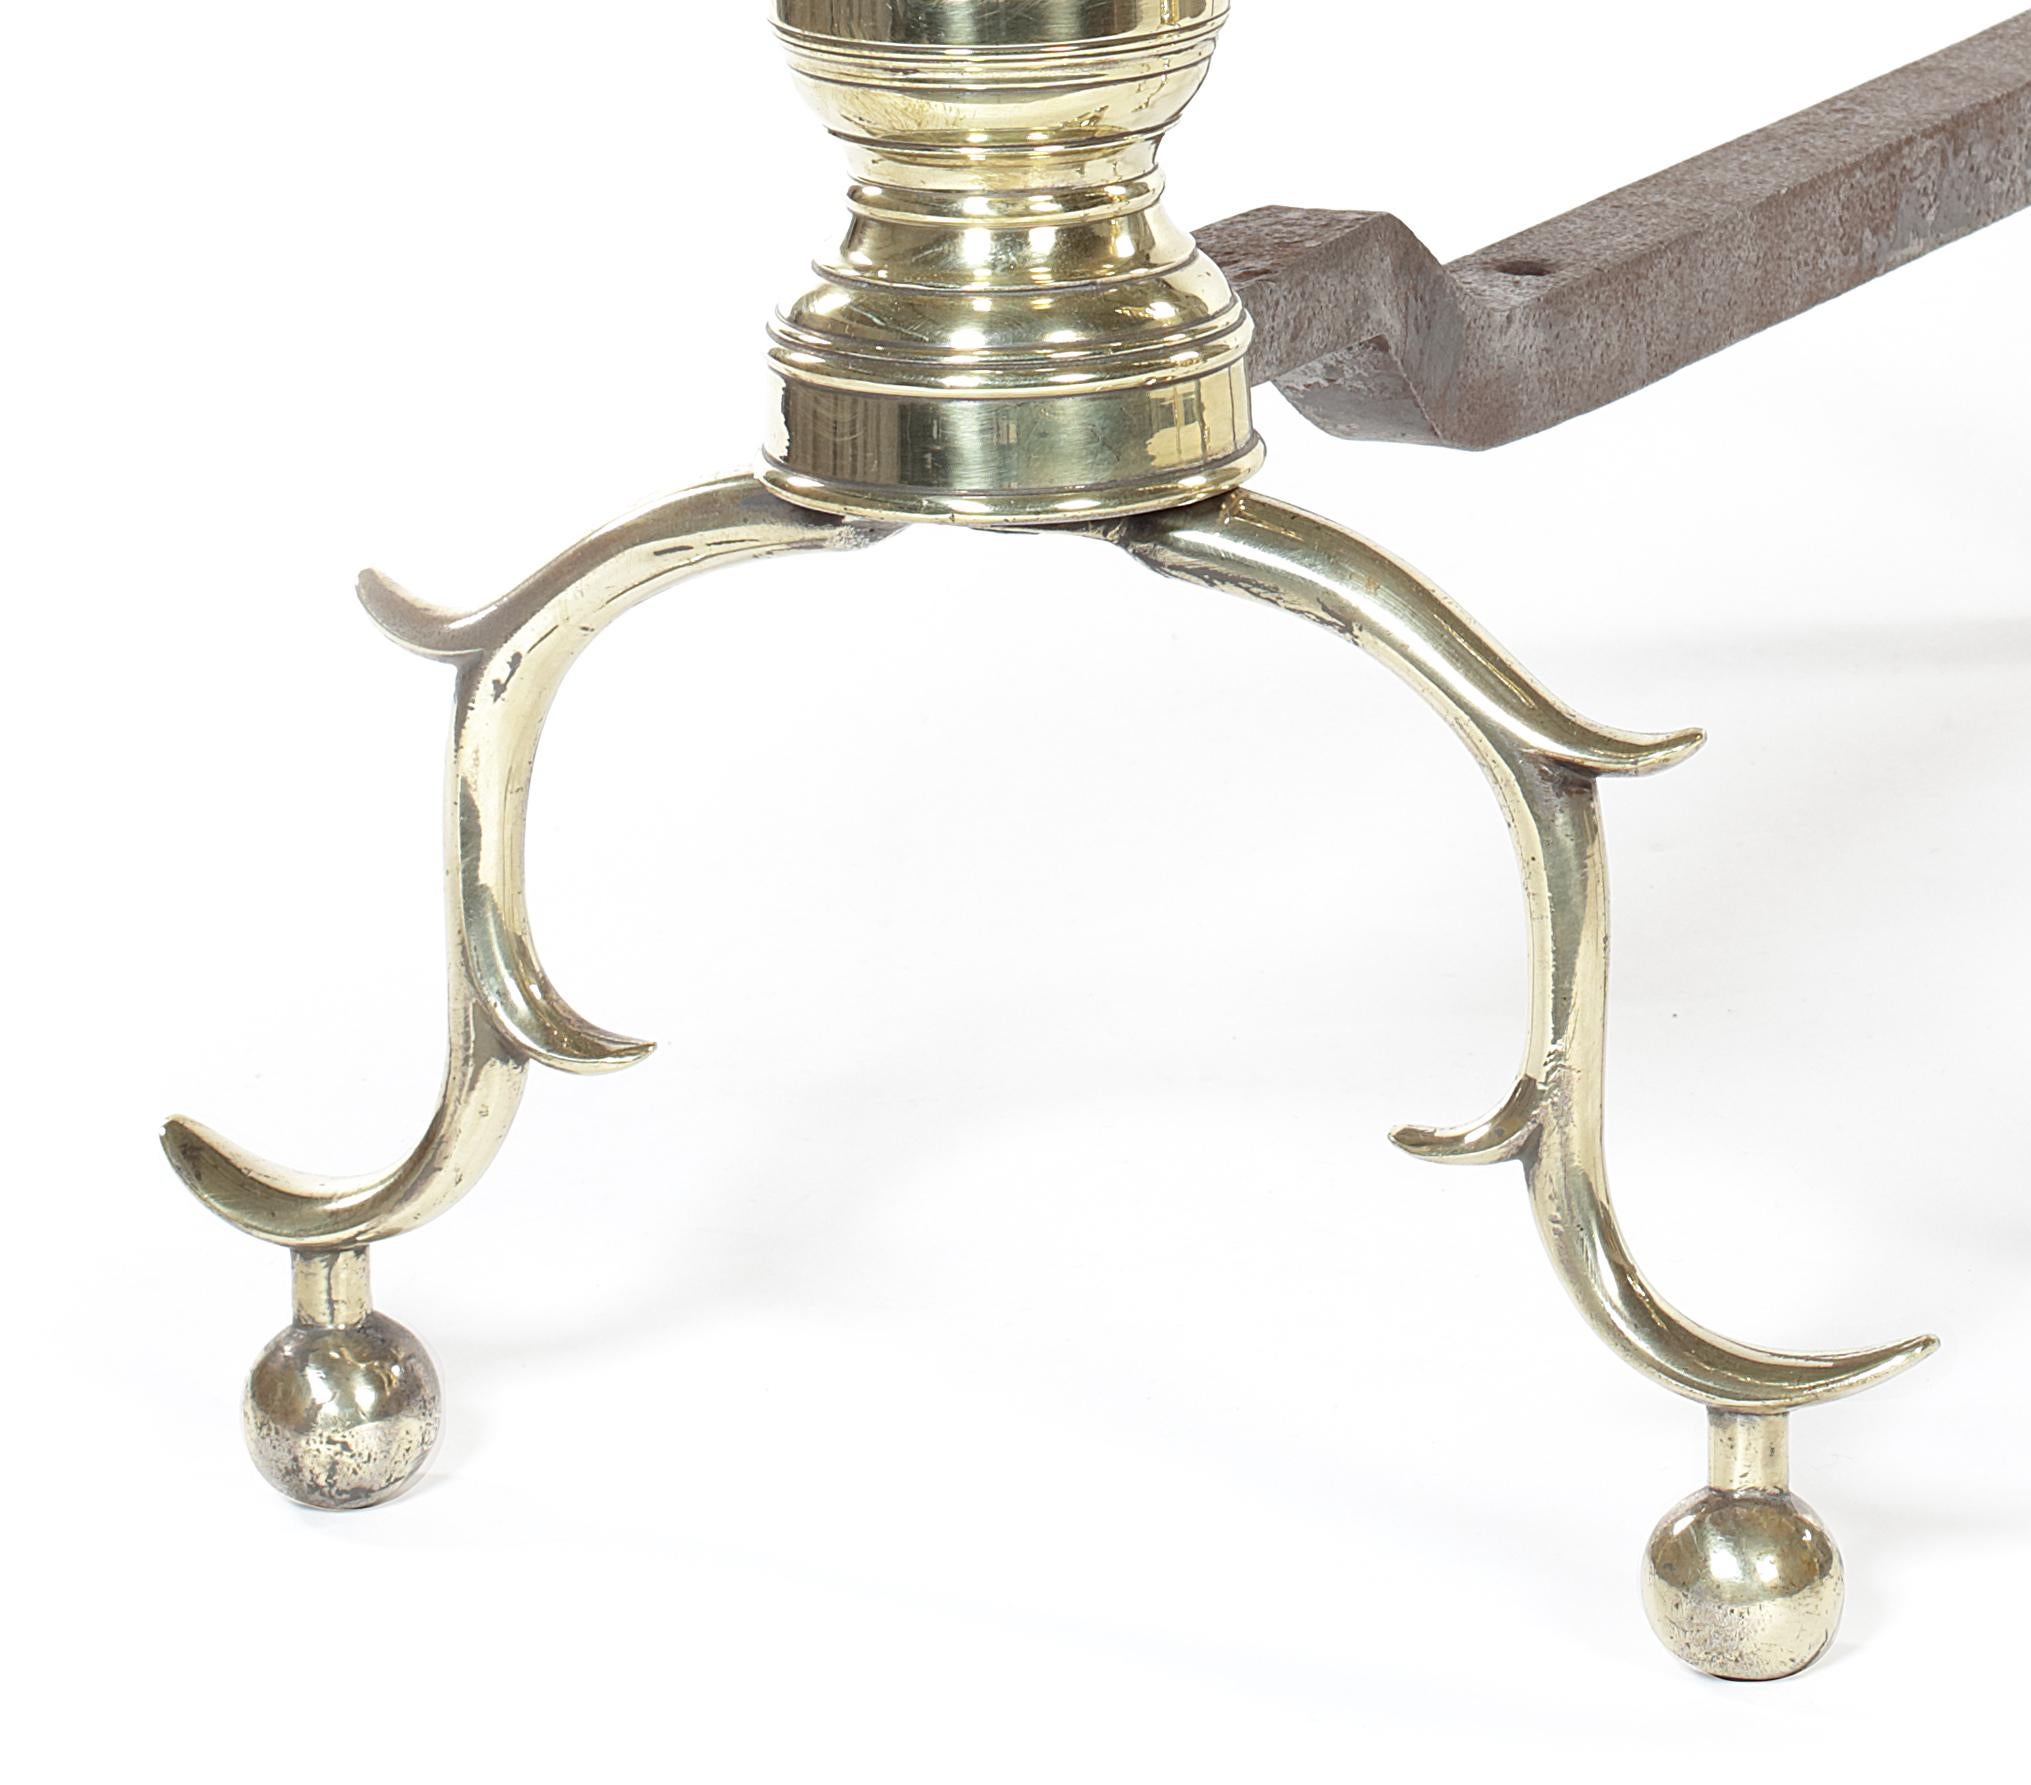 A pair of late 18th-early 19th century North American polished brass andirons
The turned supports on cabriole legs and ball feet, each 28 cm wide, 53 cm deep, 54 cm high (2).